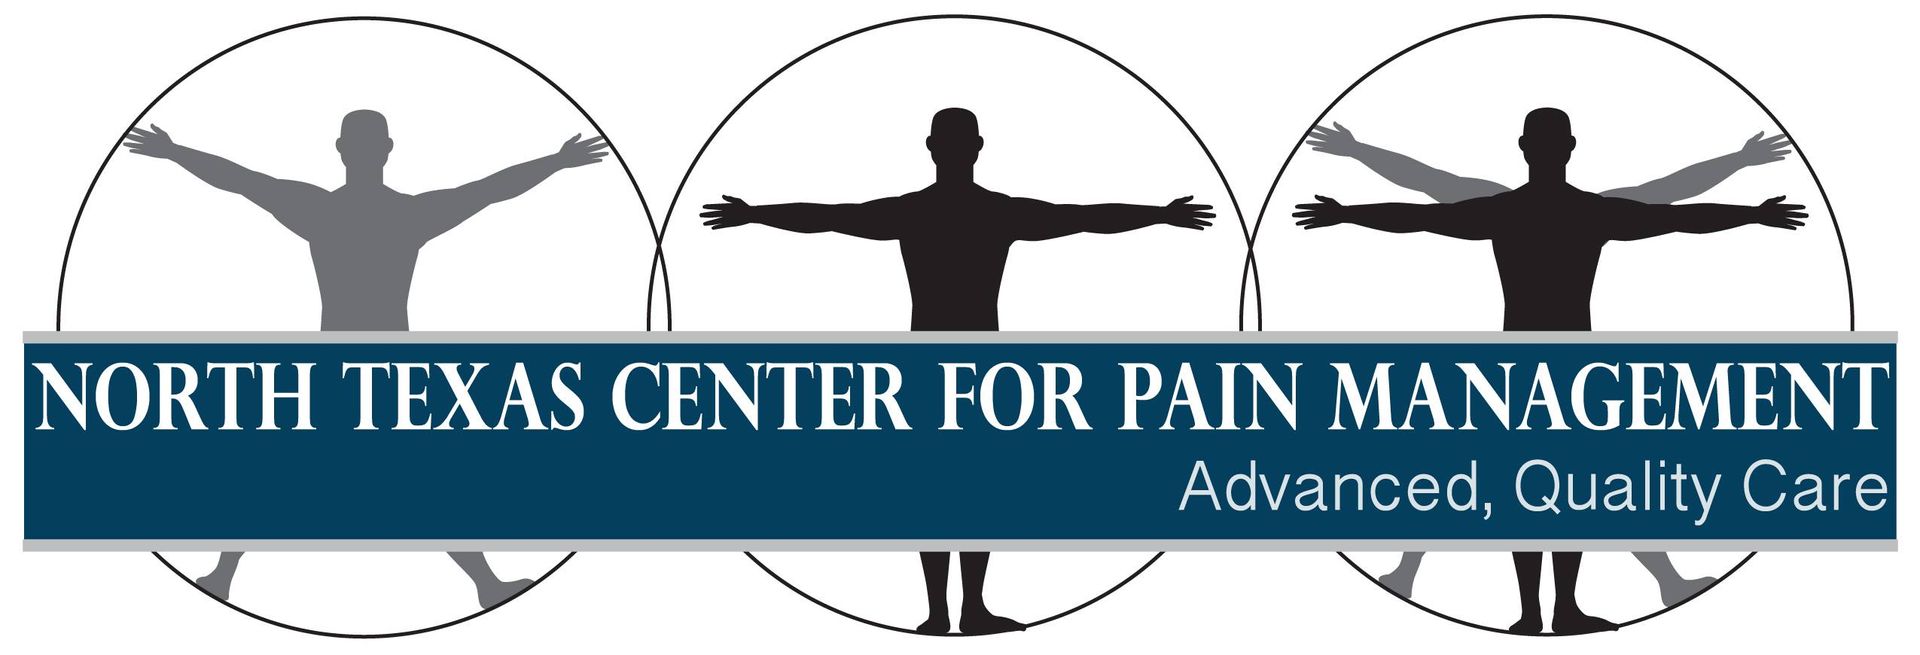 North Texas Center for Pain Management